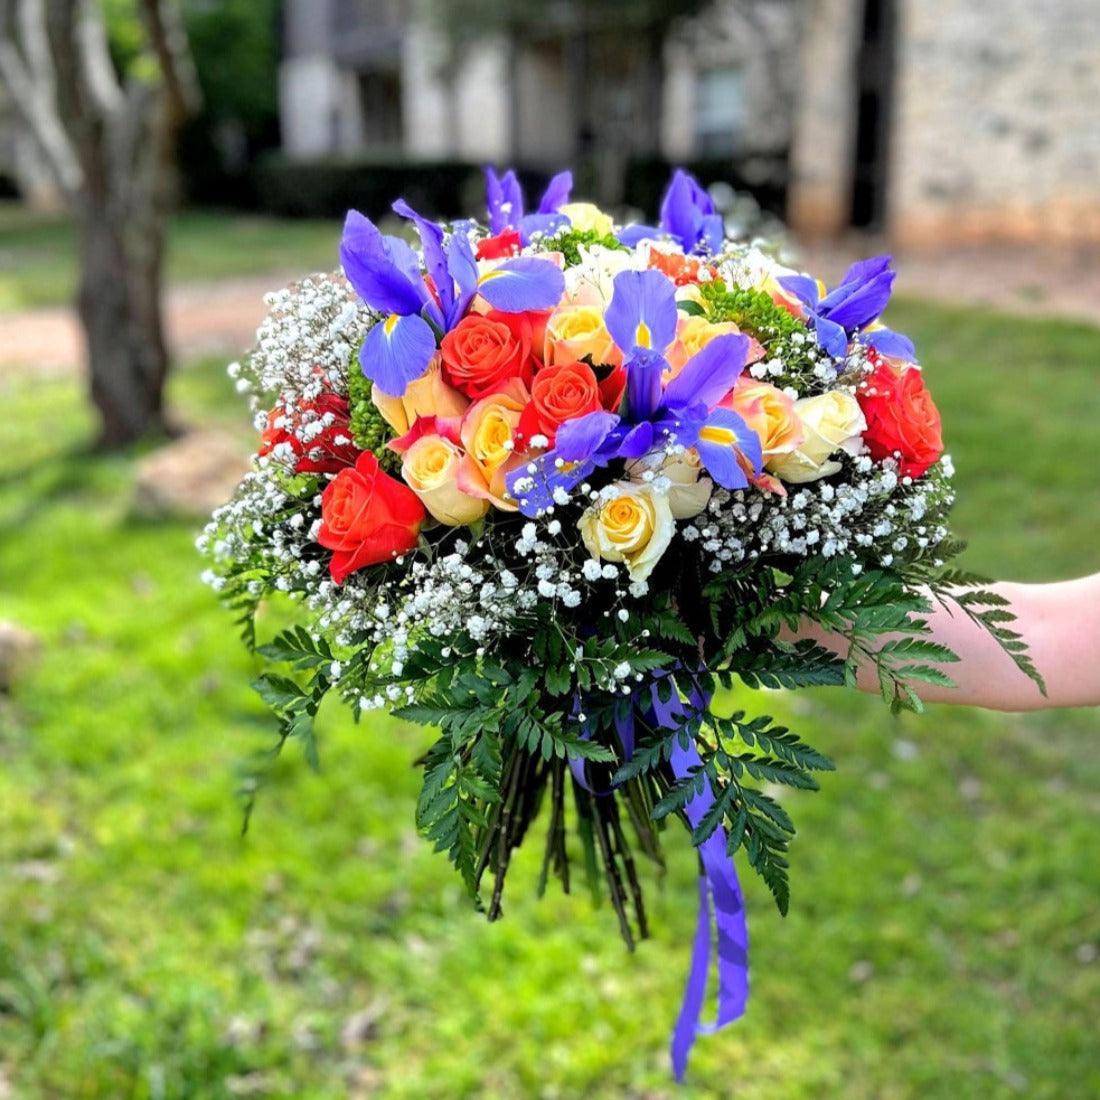 Summer Iris & Rose Bouquet - Janes Fruits and Flowers